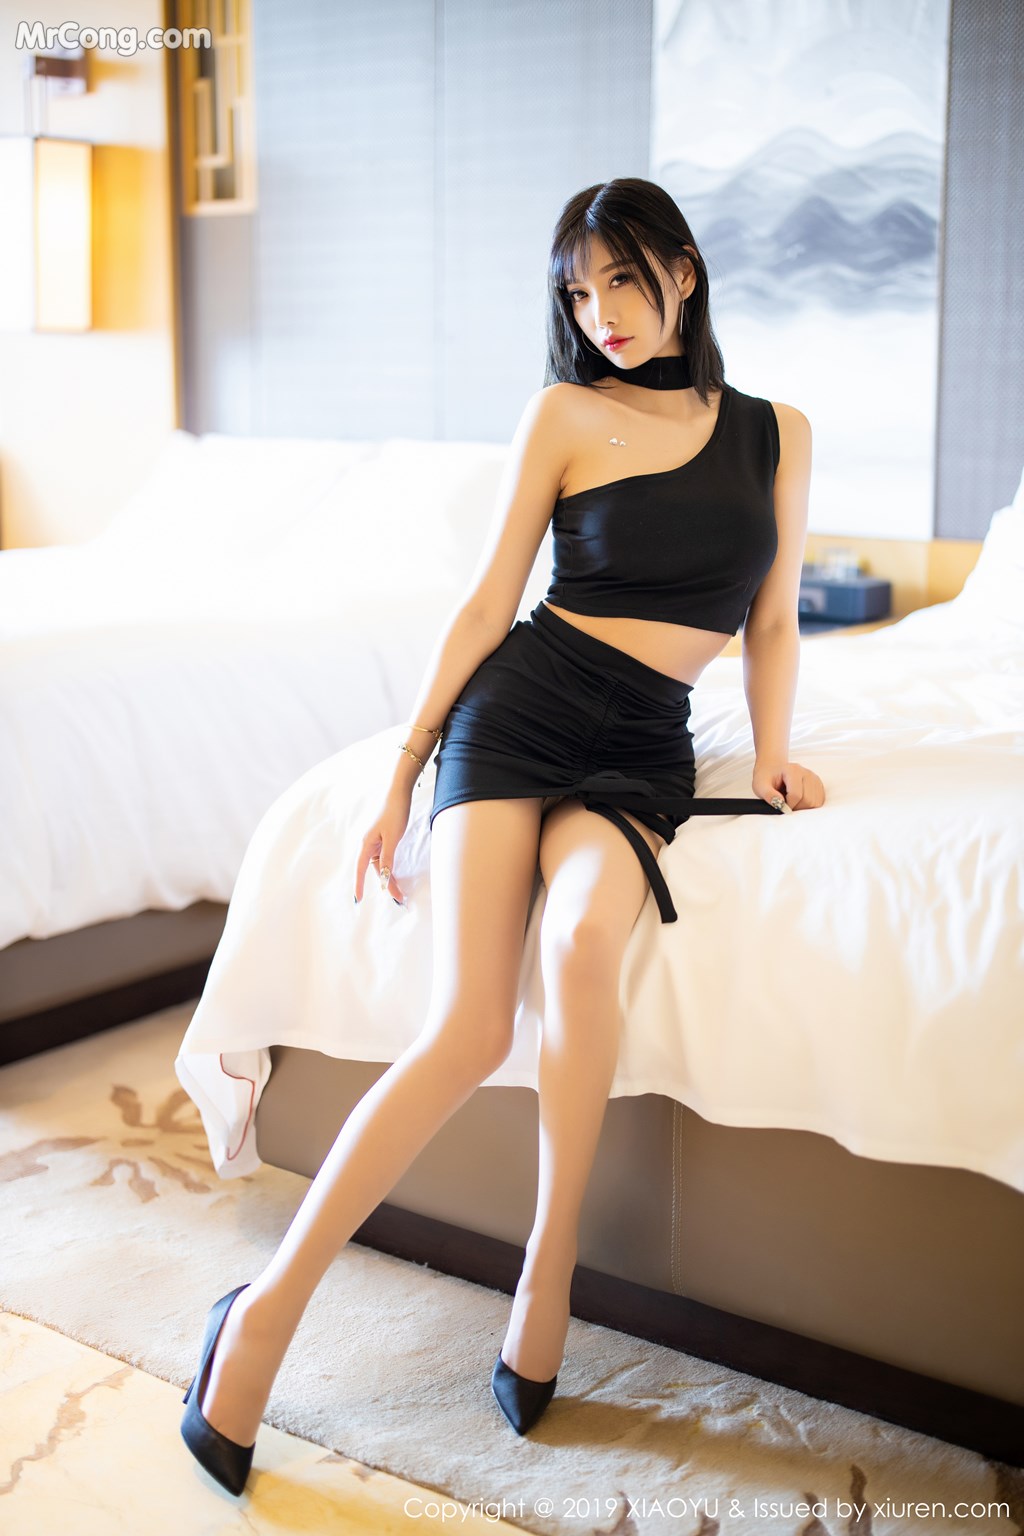 XiaoYu Vol.134: Yang Chen Chen (杨晨晨 sugar) (63 pictures)